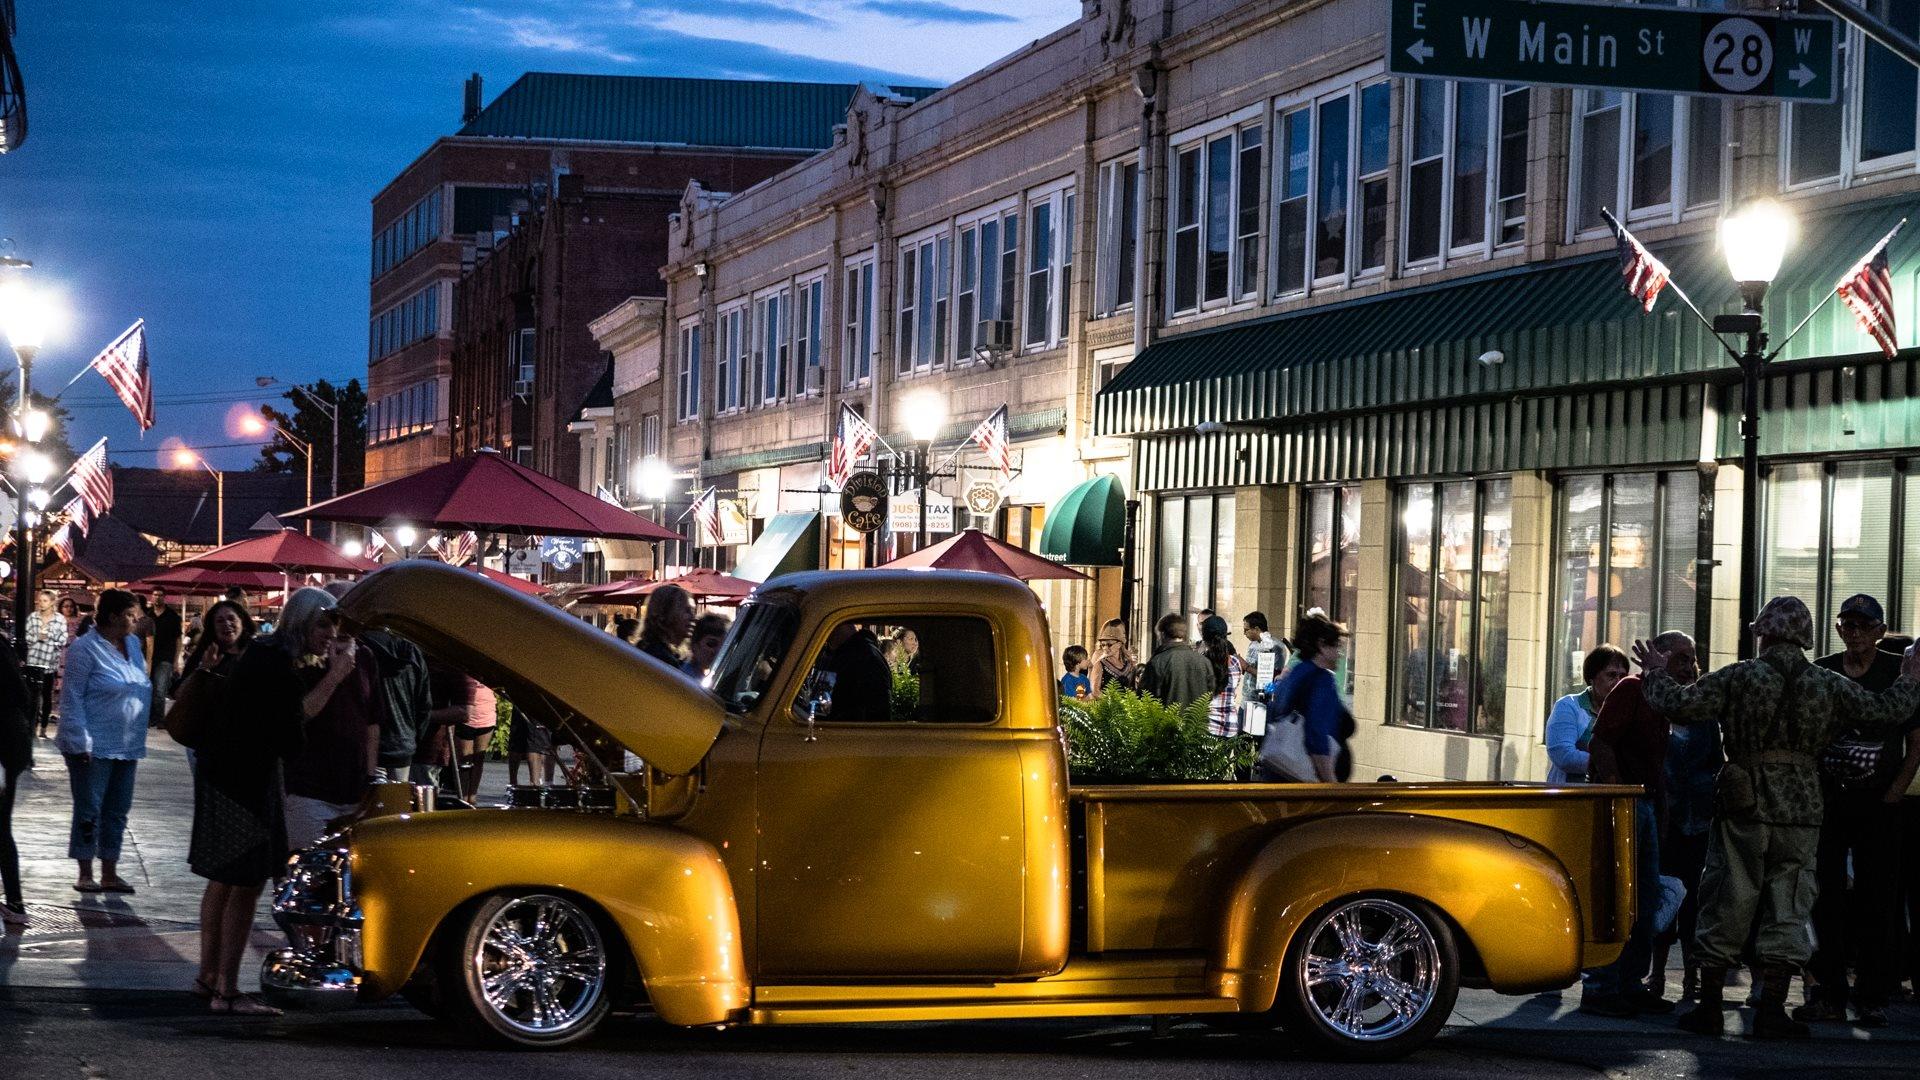 Cruise Night in Somerville New Jersey Starts Friday, May 26th 2023